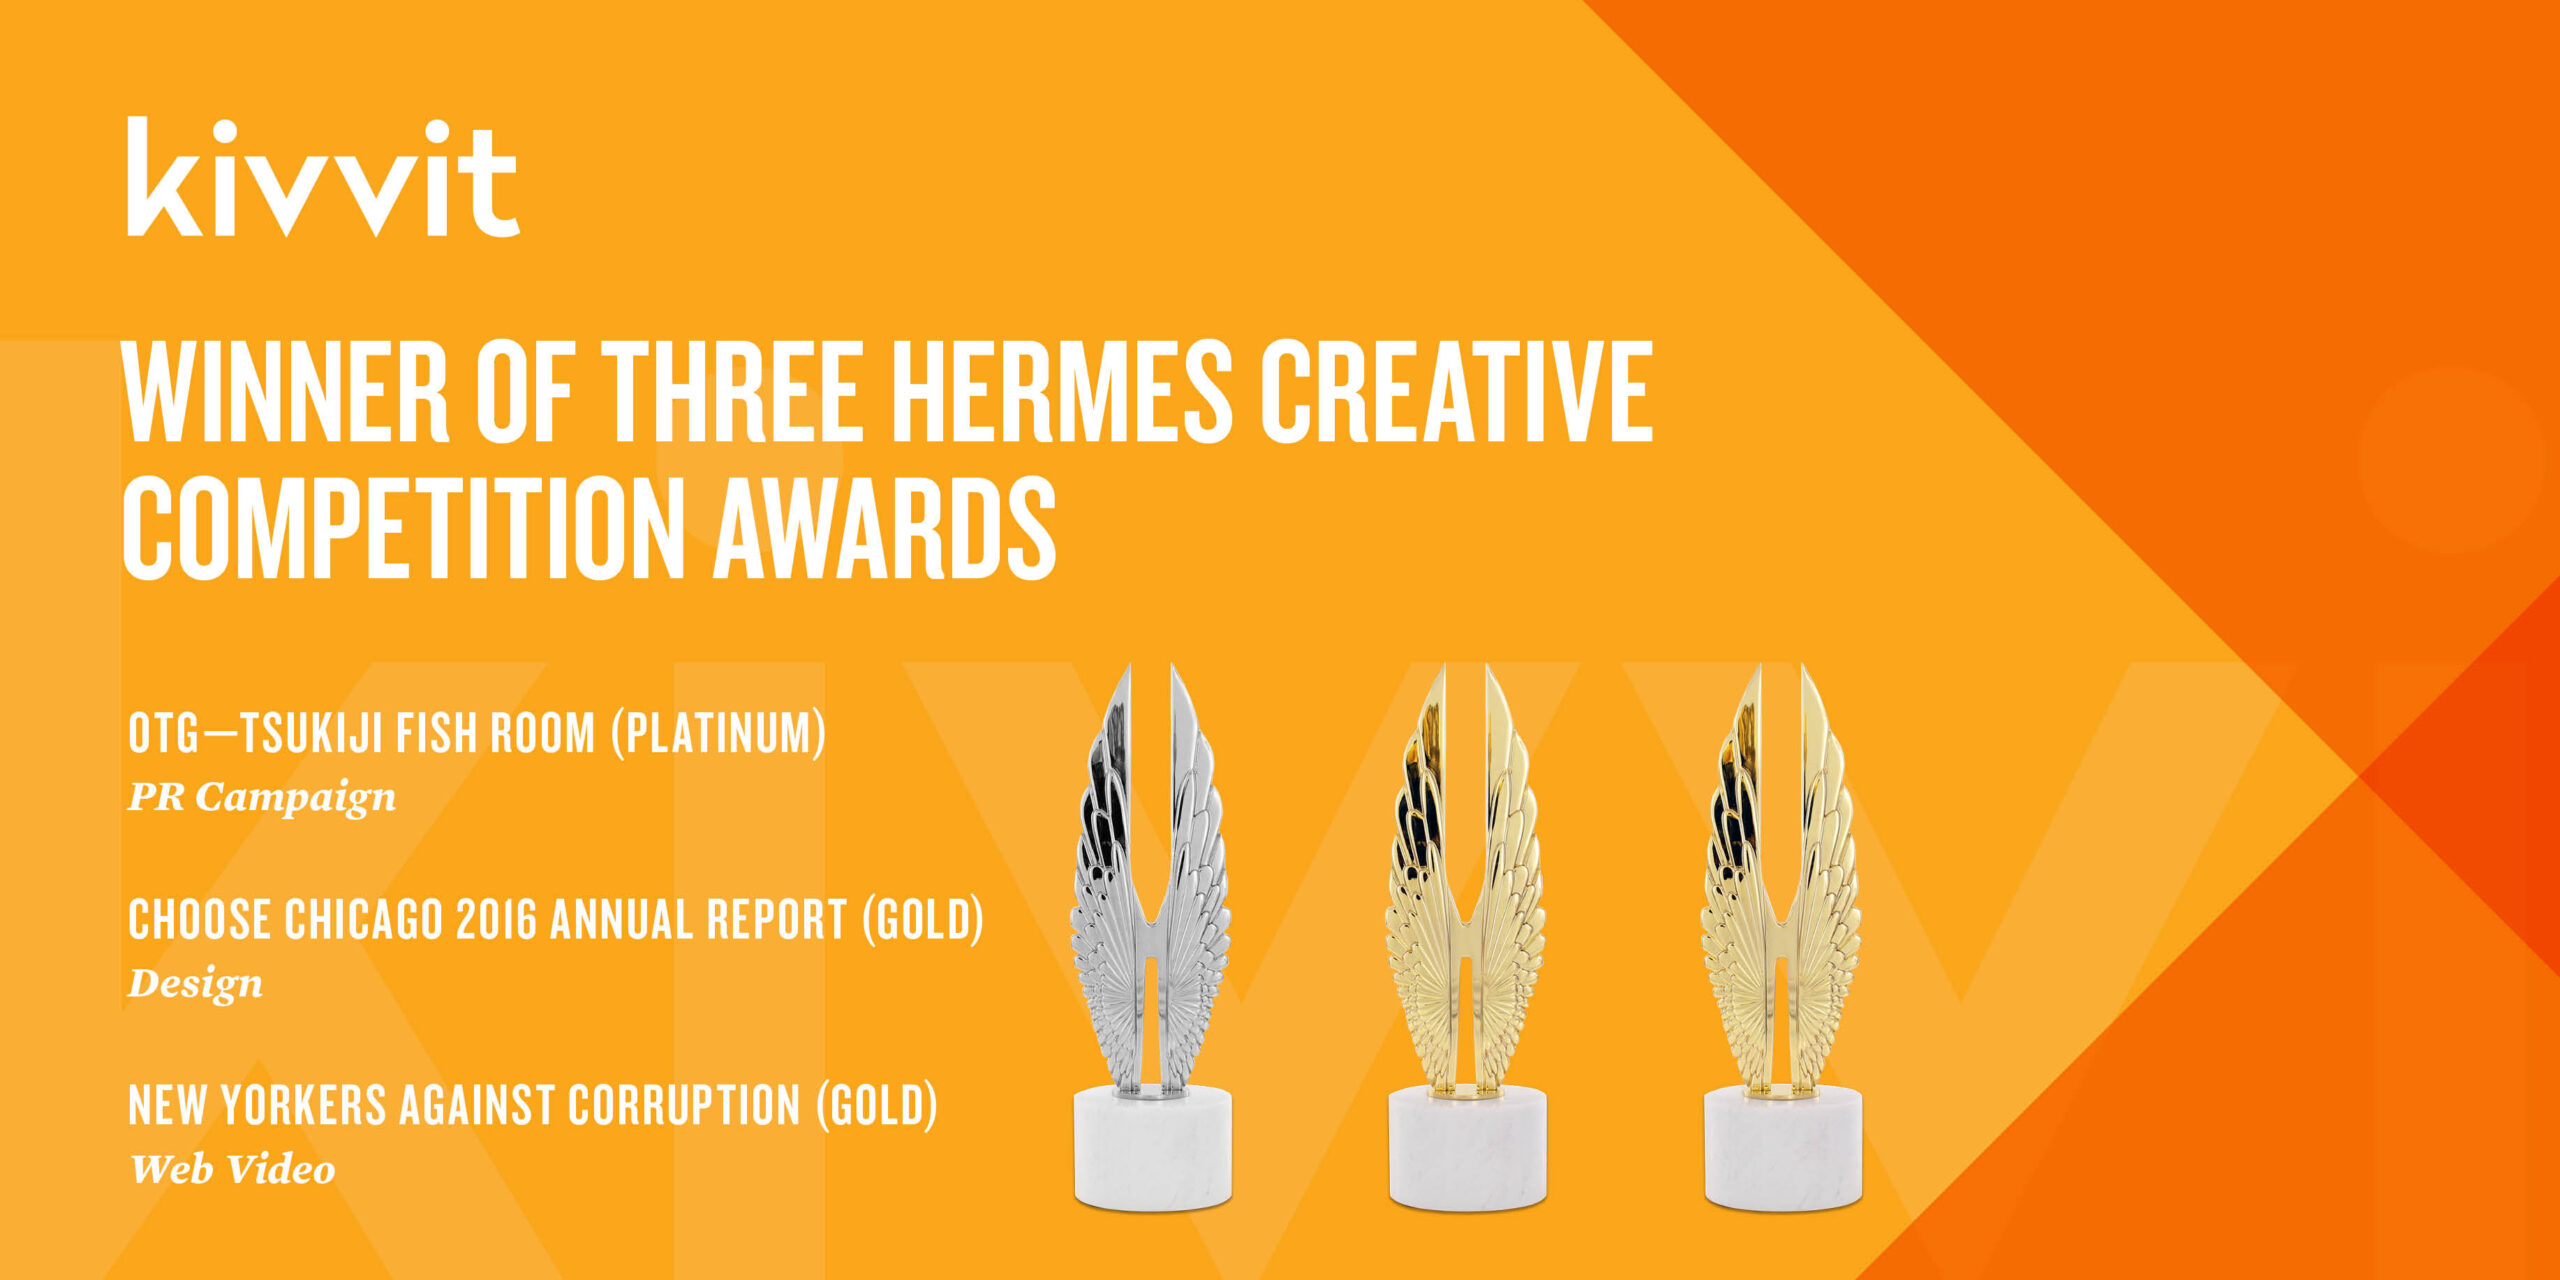 Image says Kivvit Winner of Three Hermes Creative Competition Awards. OTG-Tsukiji Room (Platinum) PR Campaign; Choose Chicago 2016 Annual Report (Gold) Design; New Yorkers Against Corruption (Gold) Web Video